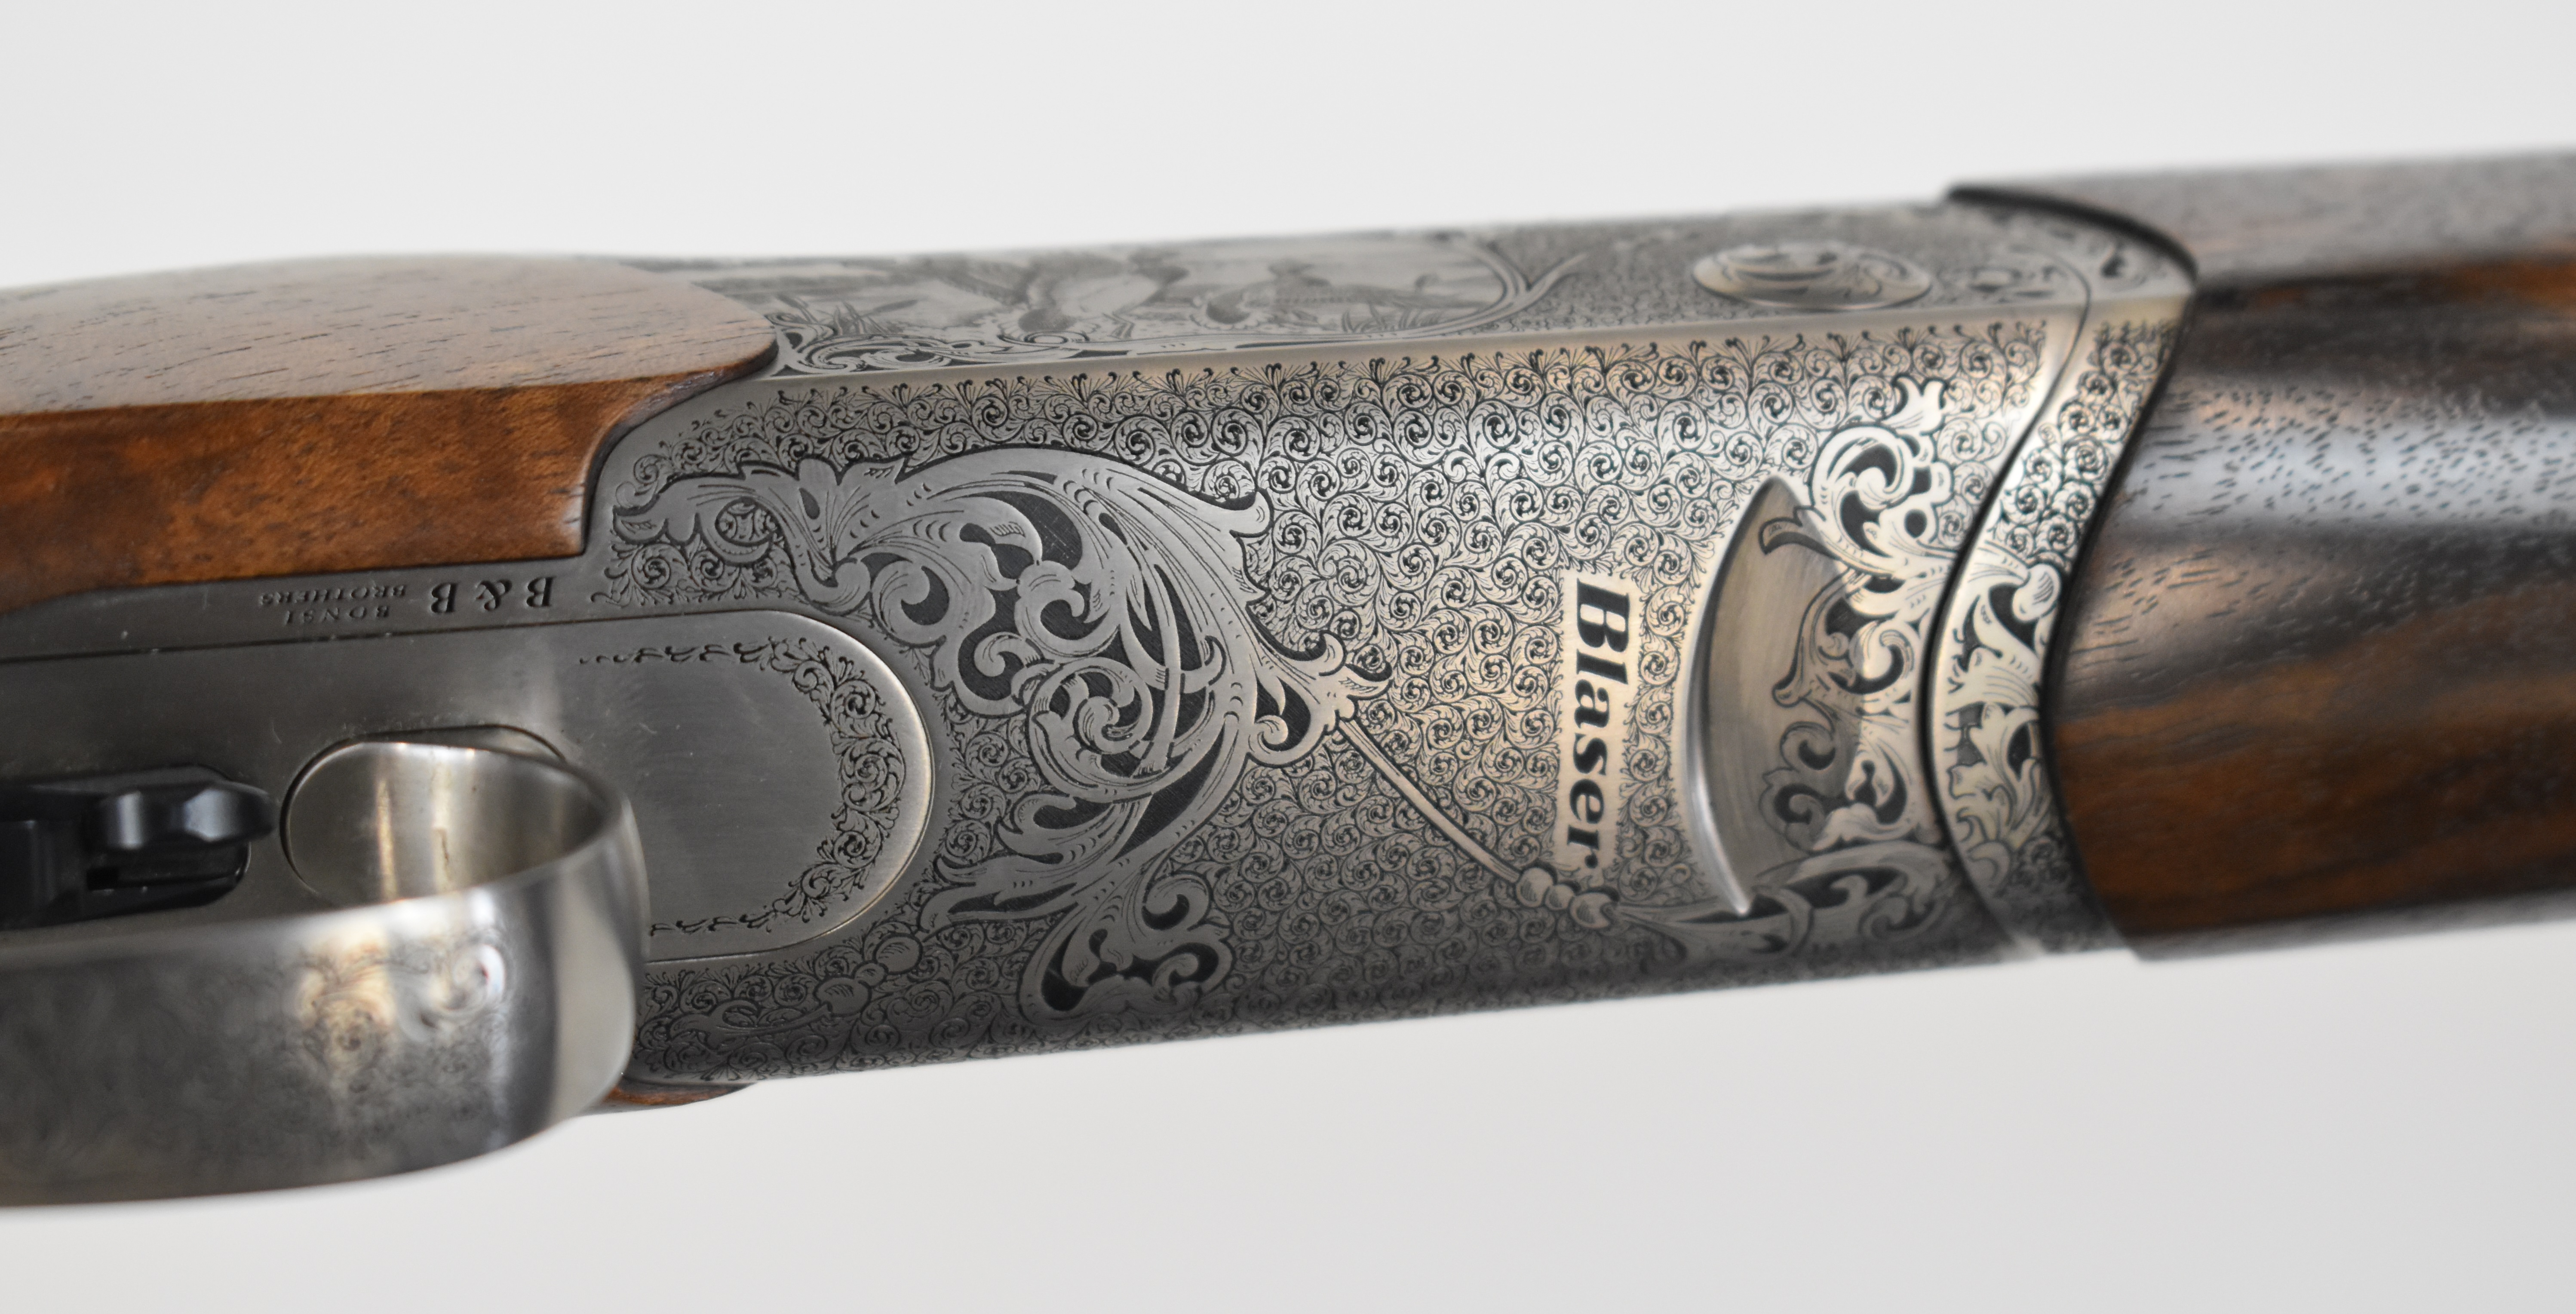 Blaser F16 Grand Luxe 12 bore over under ejector shotgun with Bonsi Brothers engraved locks, - Image 7 of 14